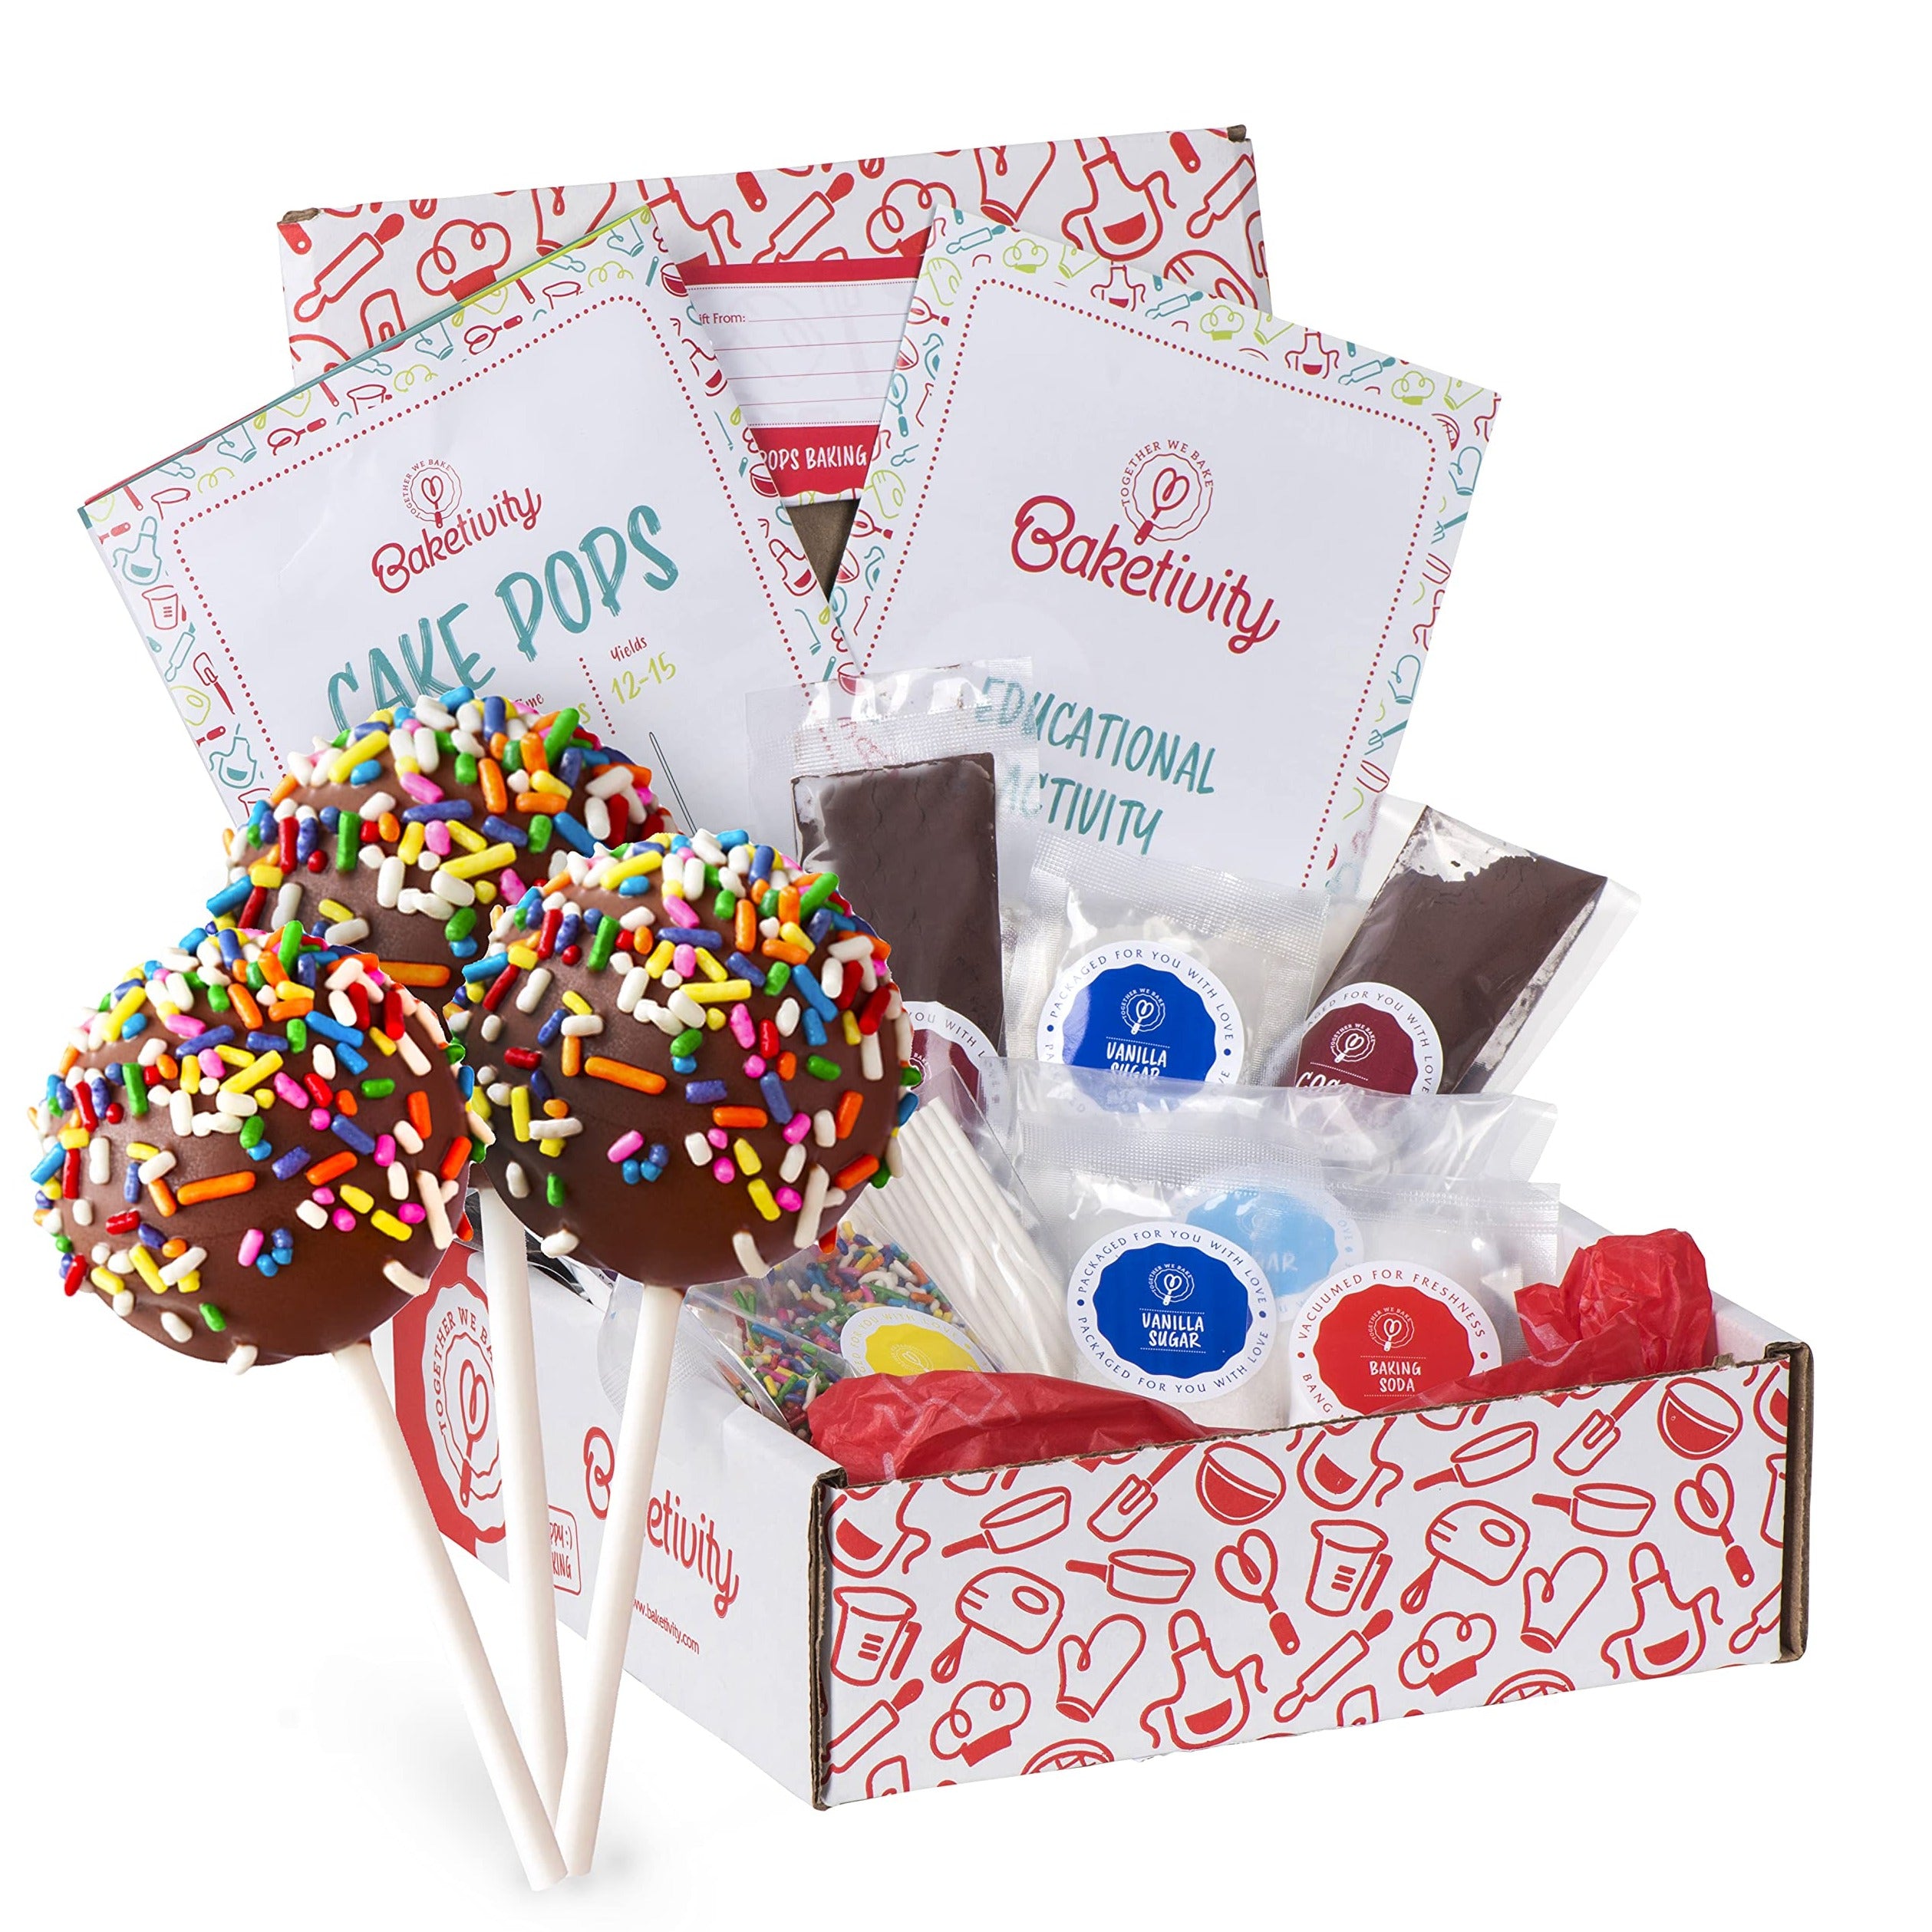 Baketivity 2-Pack Cake Pops and Whoopie Pies Bake Kits